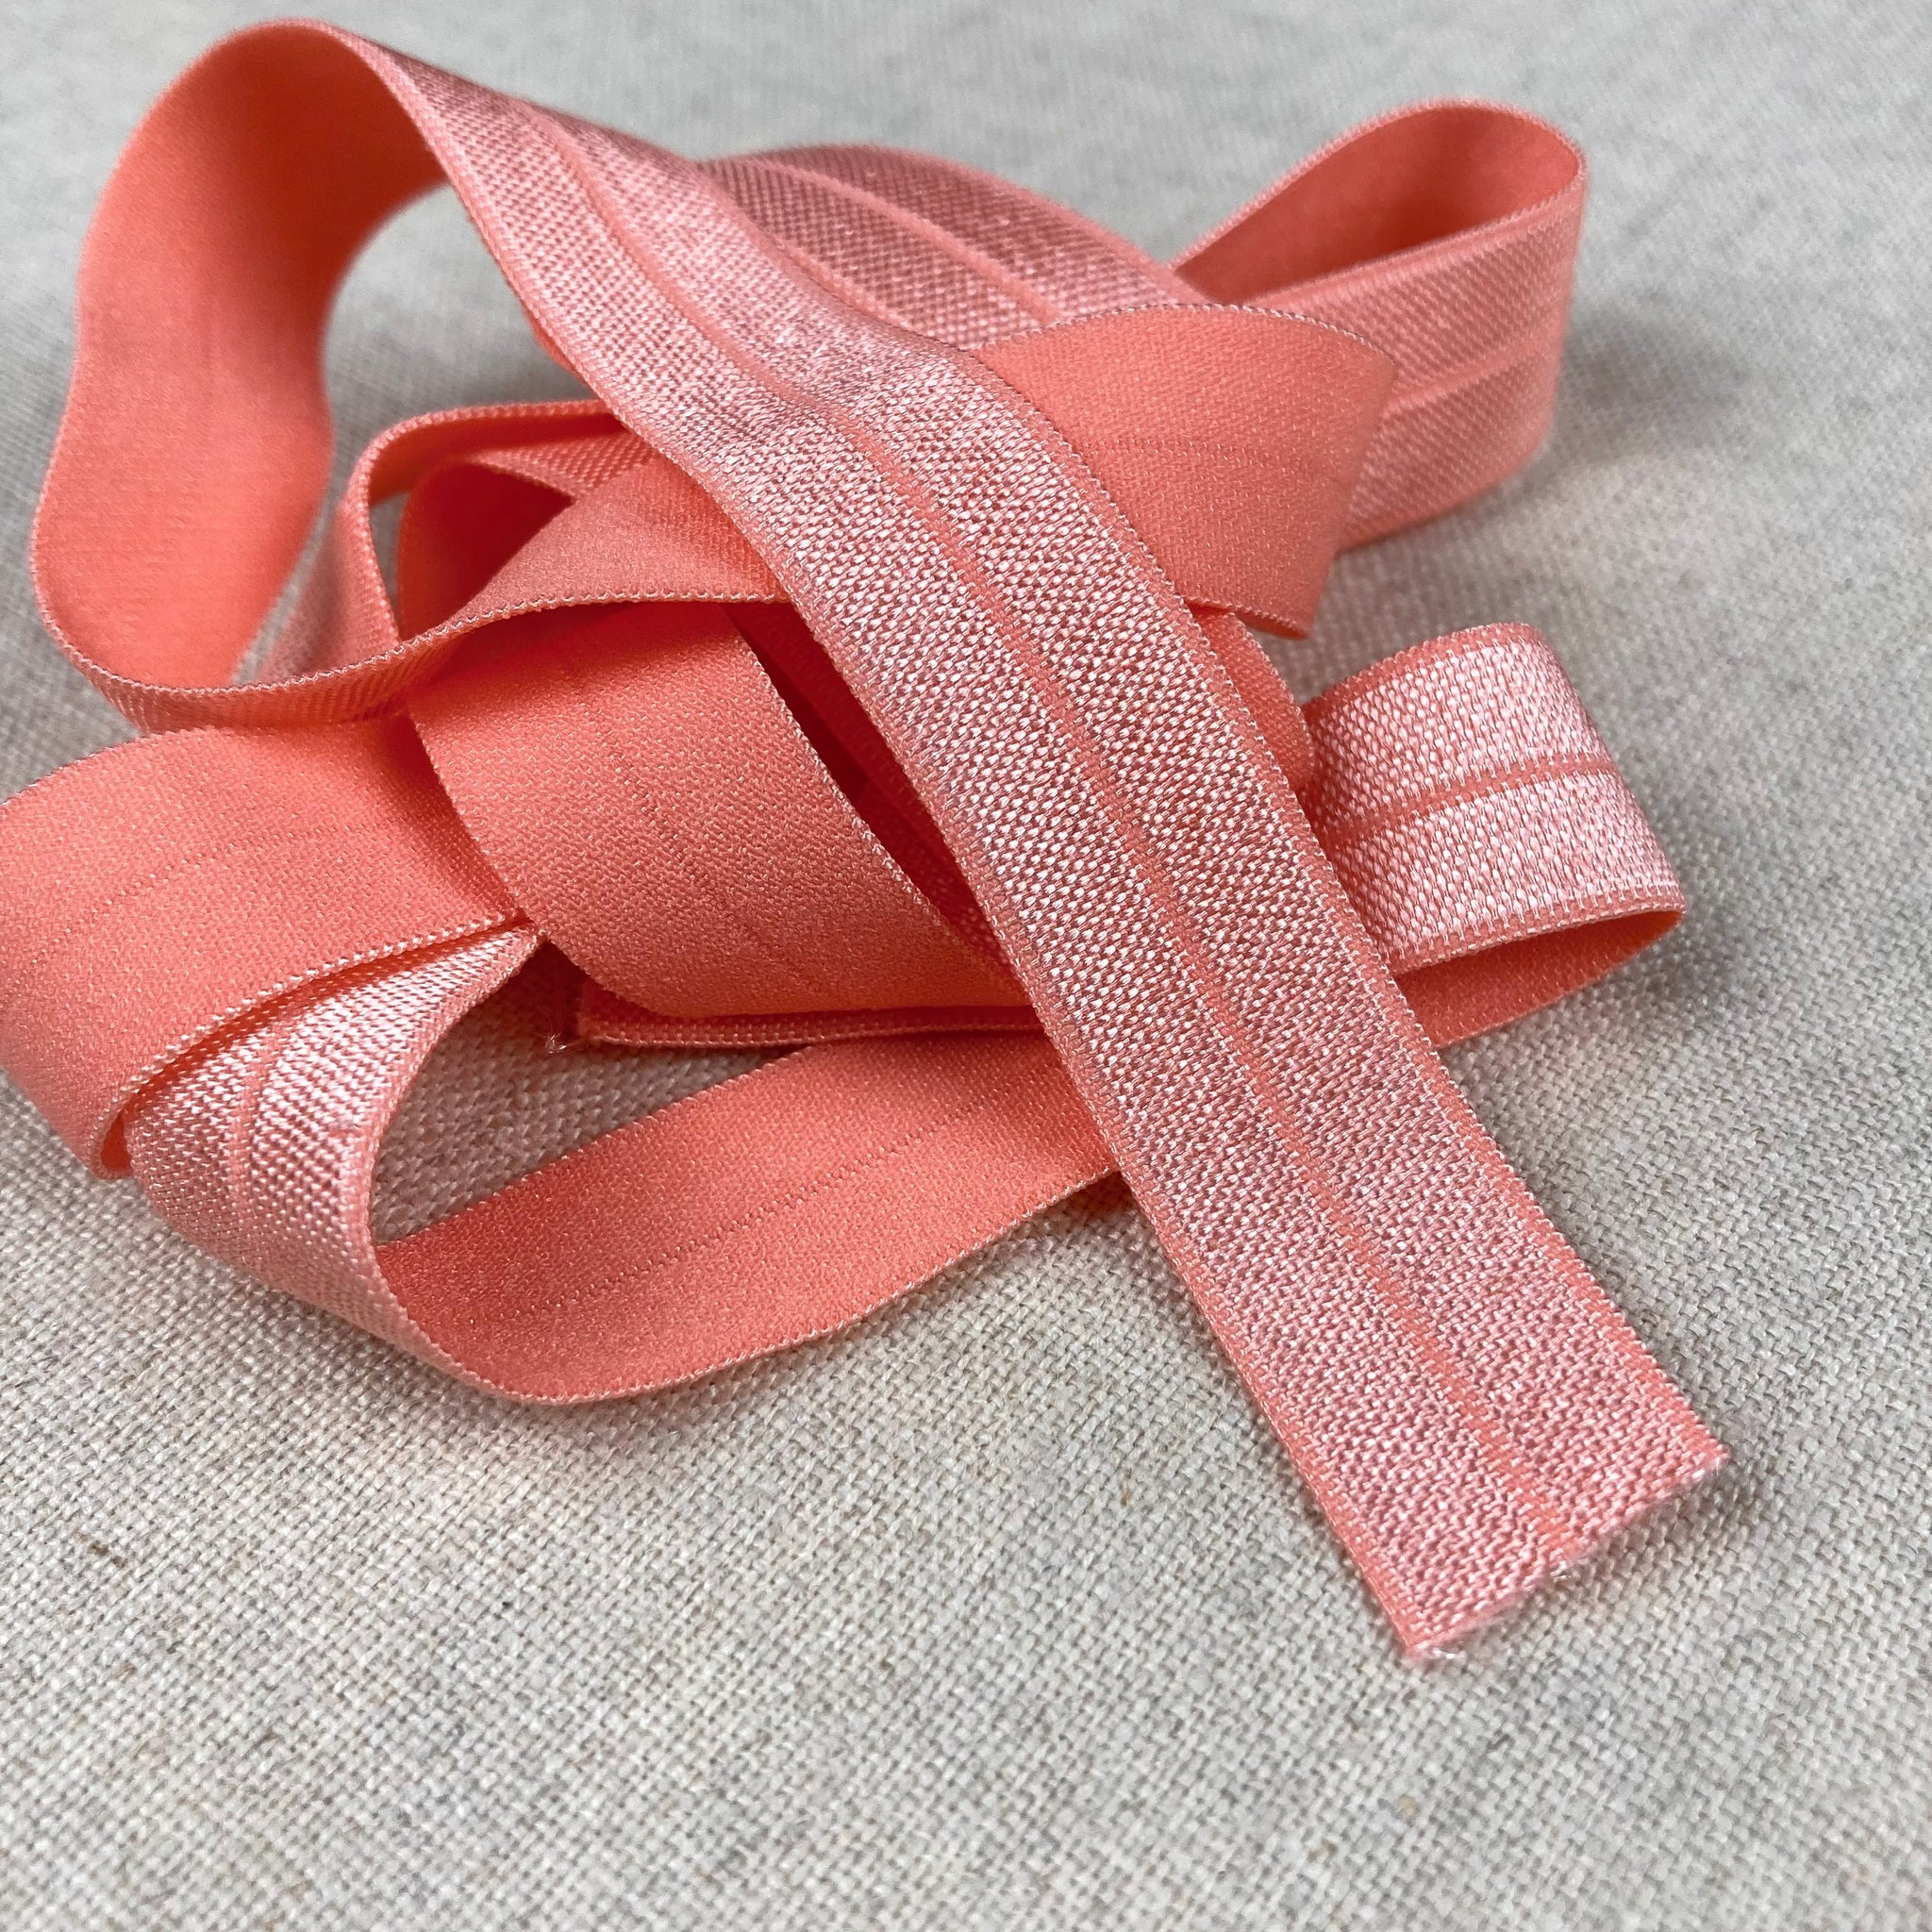 5/8 Fold Over Elastic: Peach Pink - 1 Meter – Sewing Kit Supply